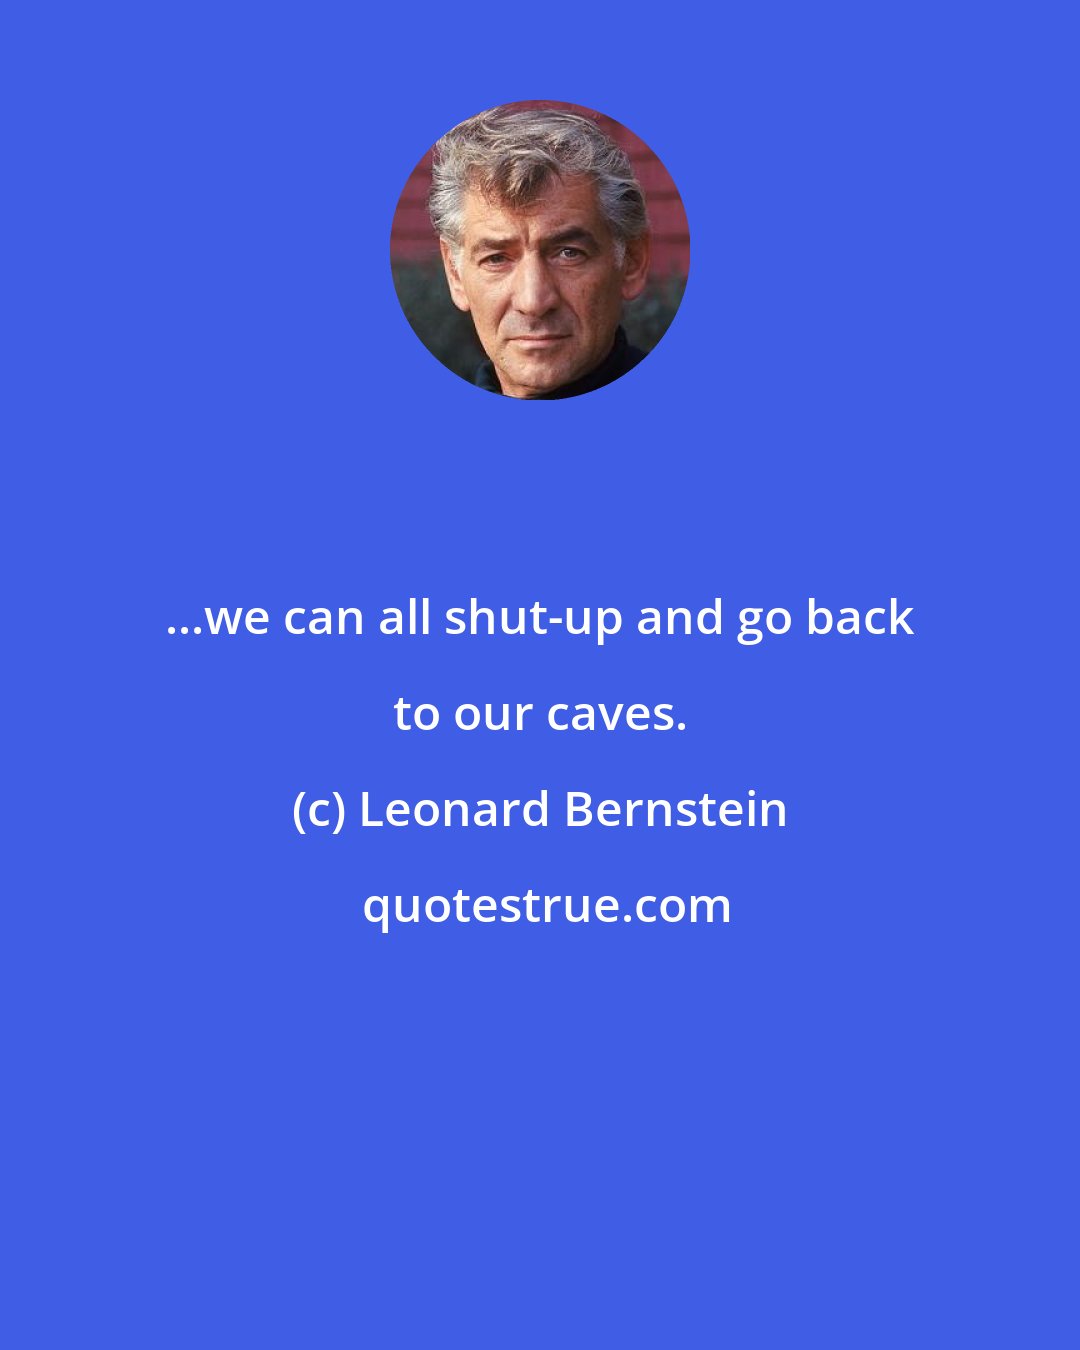 Leonard Bernstein: ...we can all shut-up and go back to our caves.